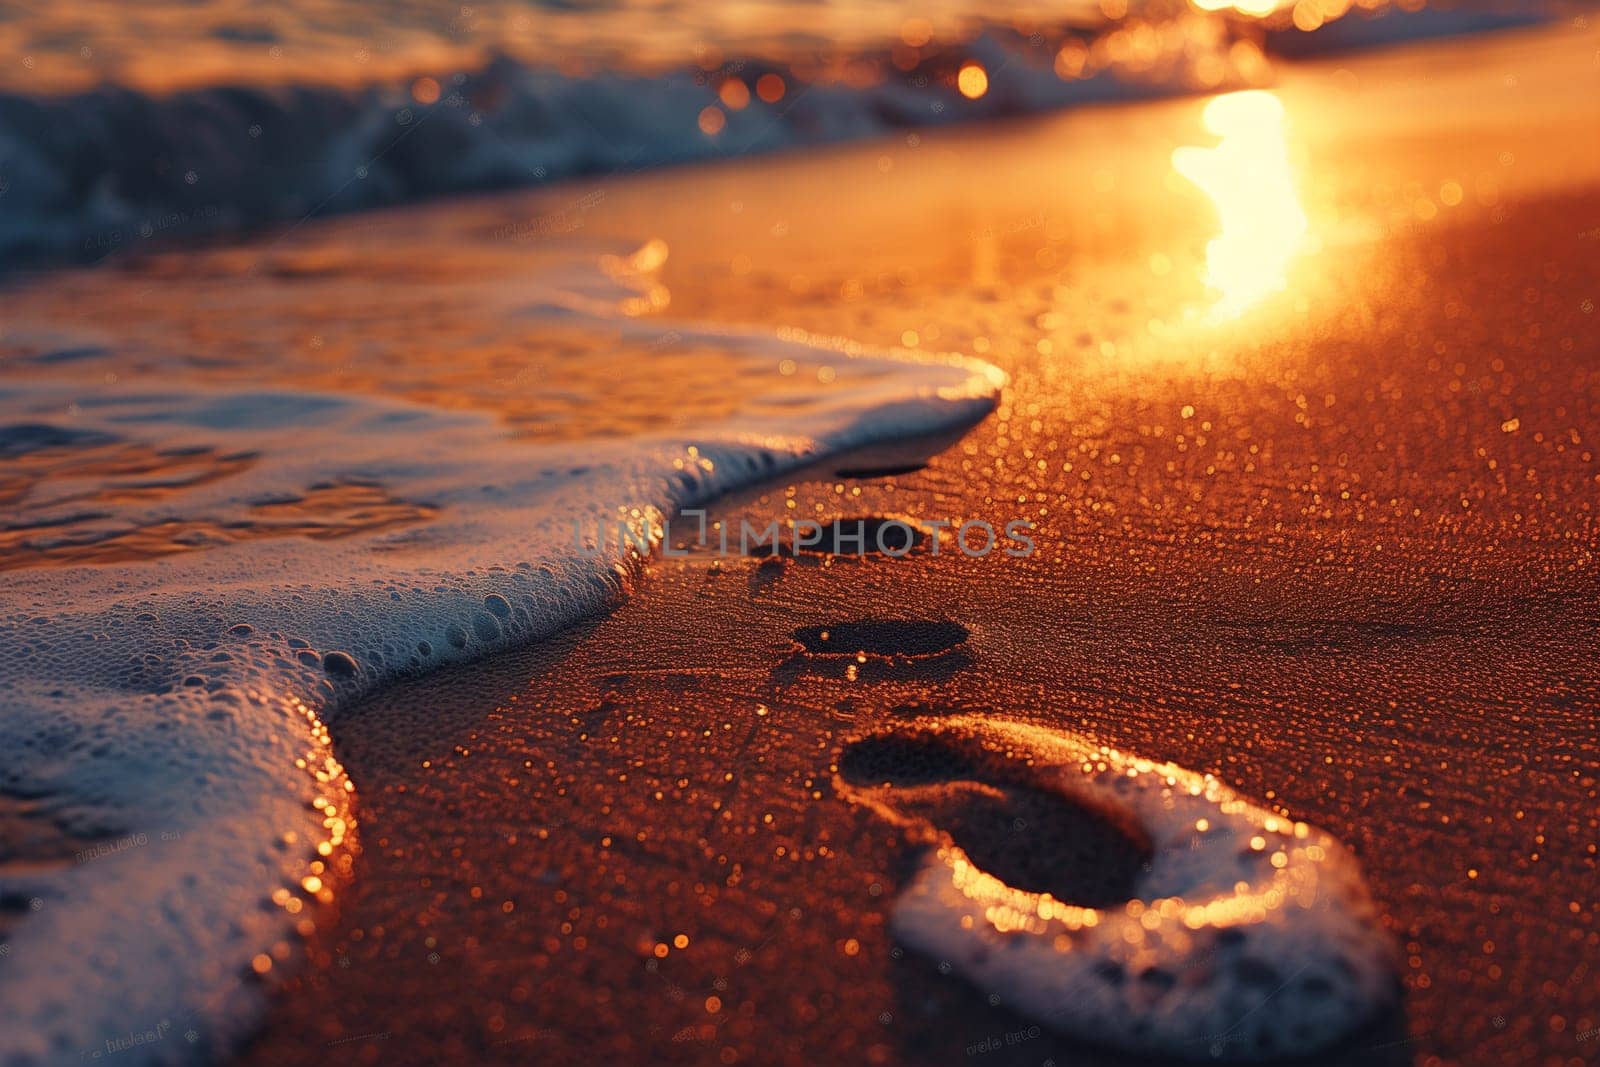 Footprints in the Sand on Beach at Sunset by Sd28DimoN_1976